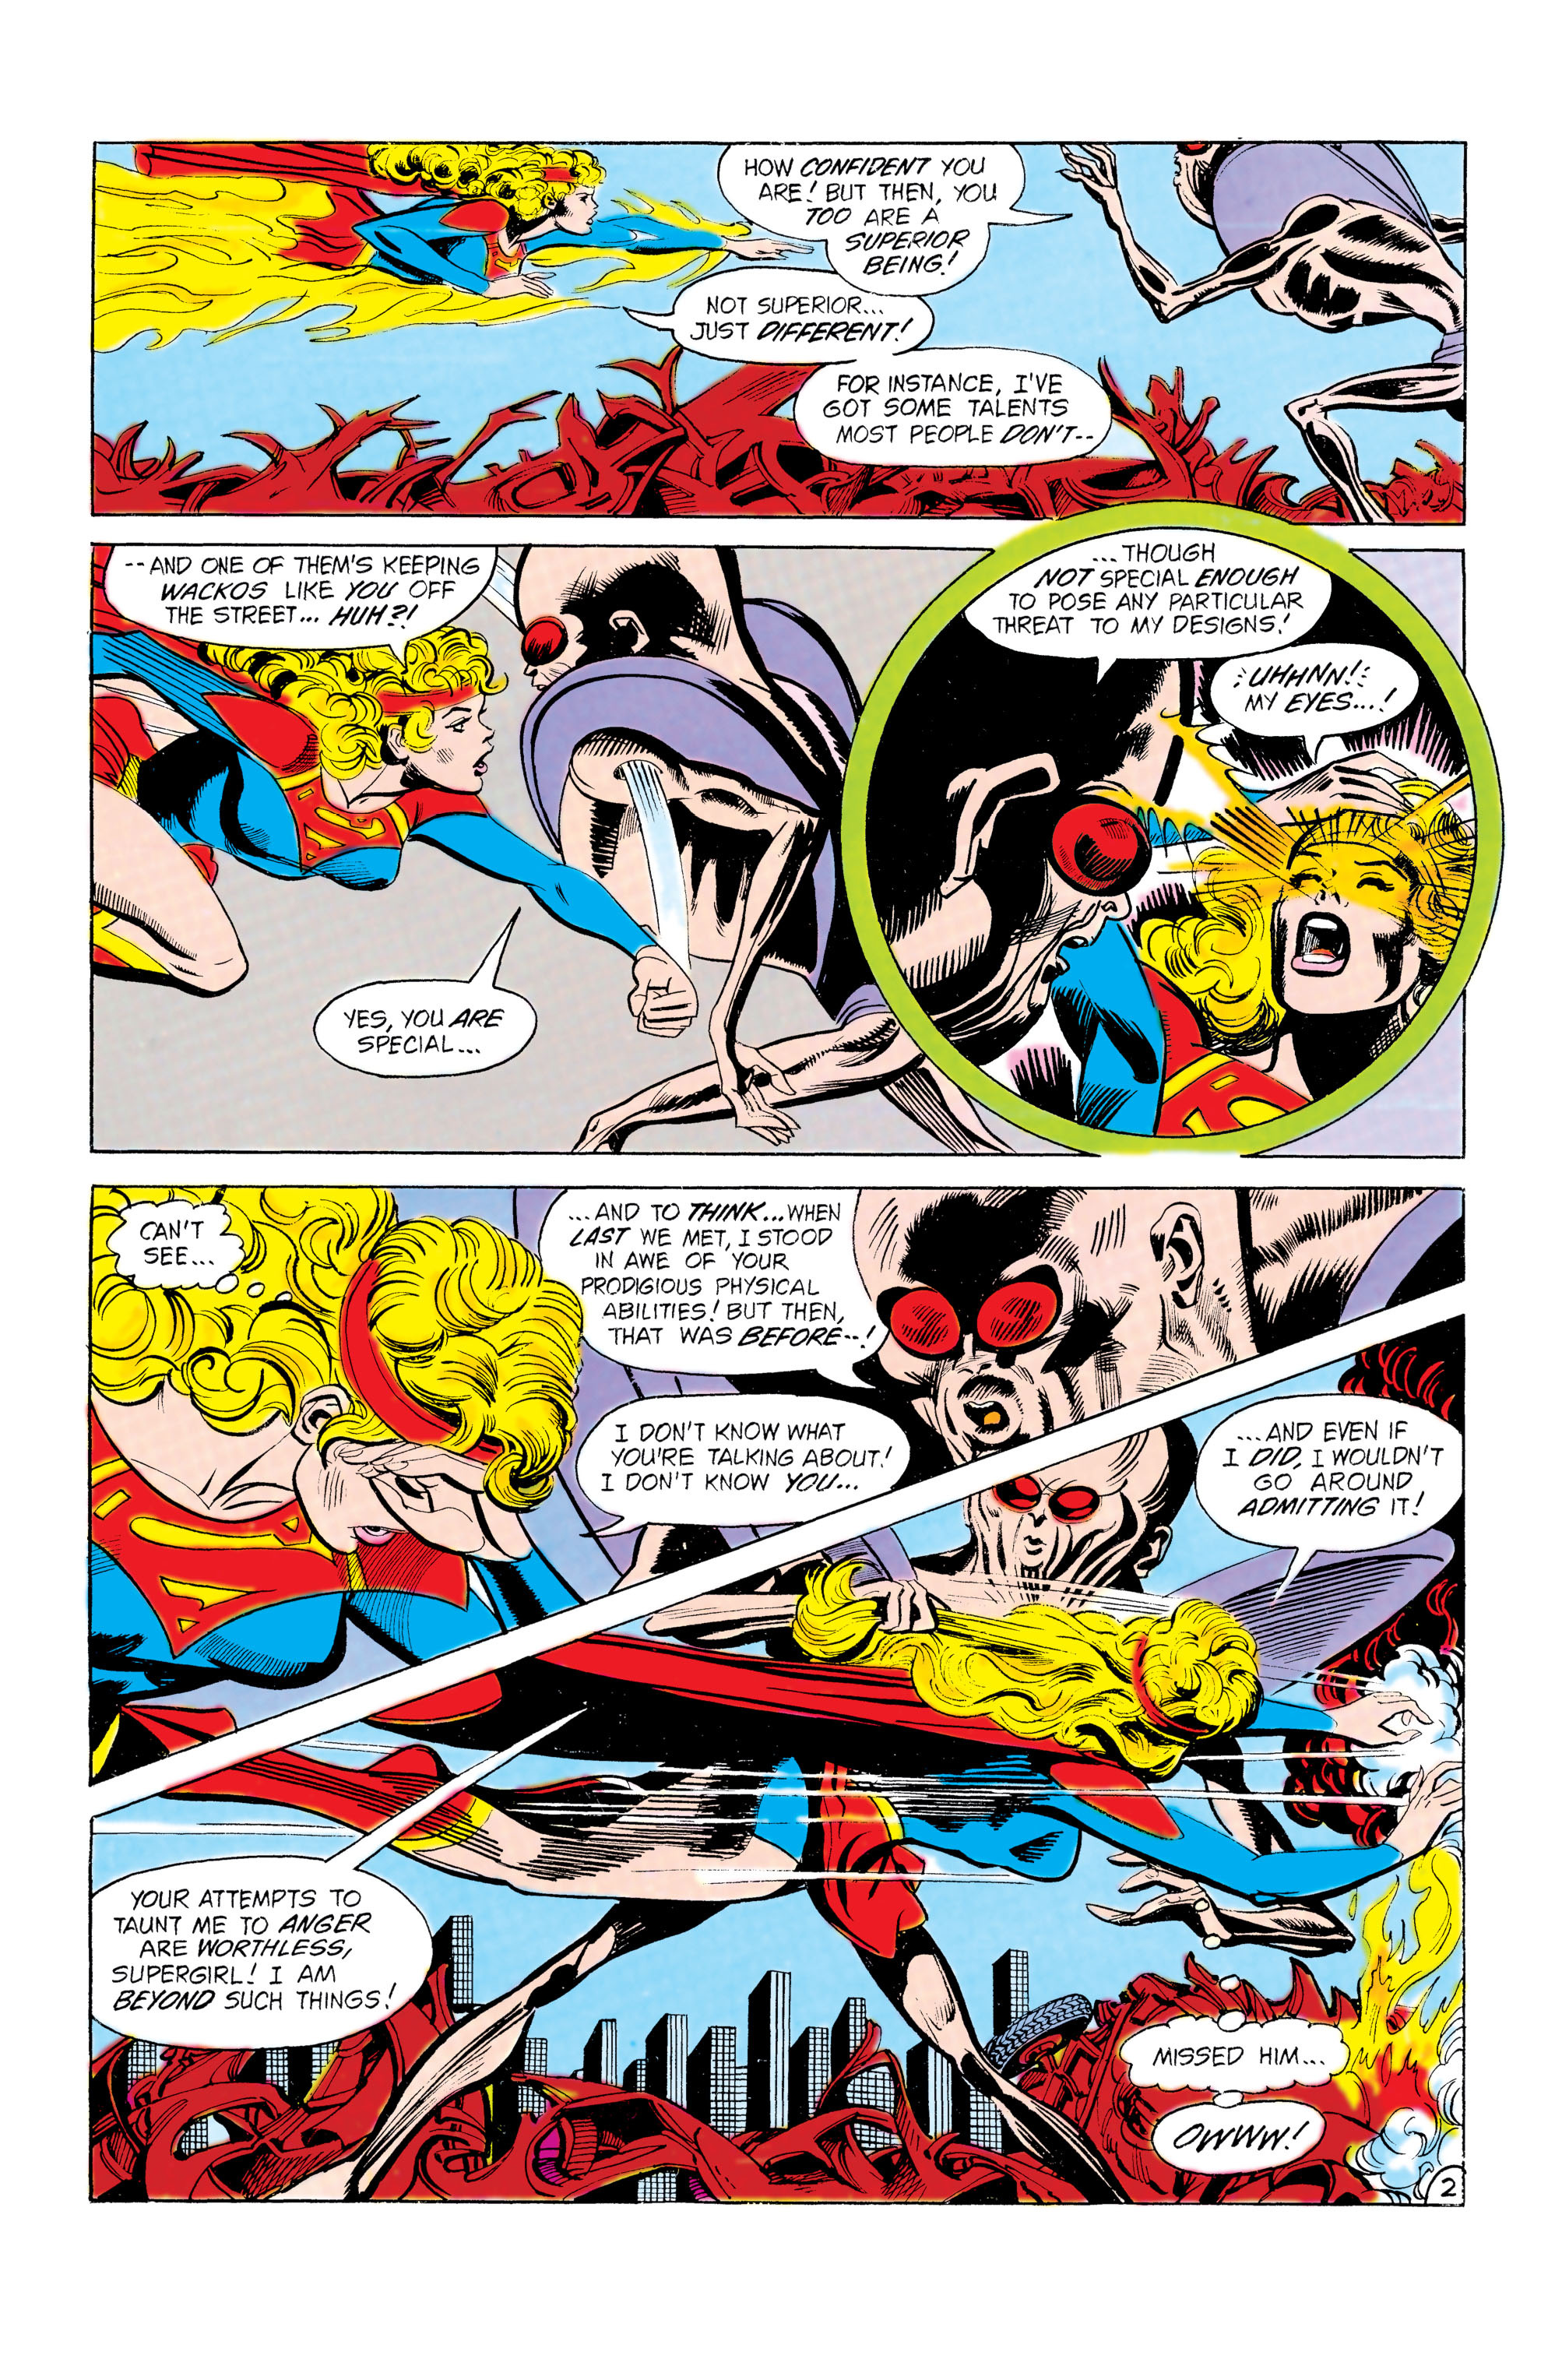 Supergirl (1982) 23 Page 2